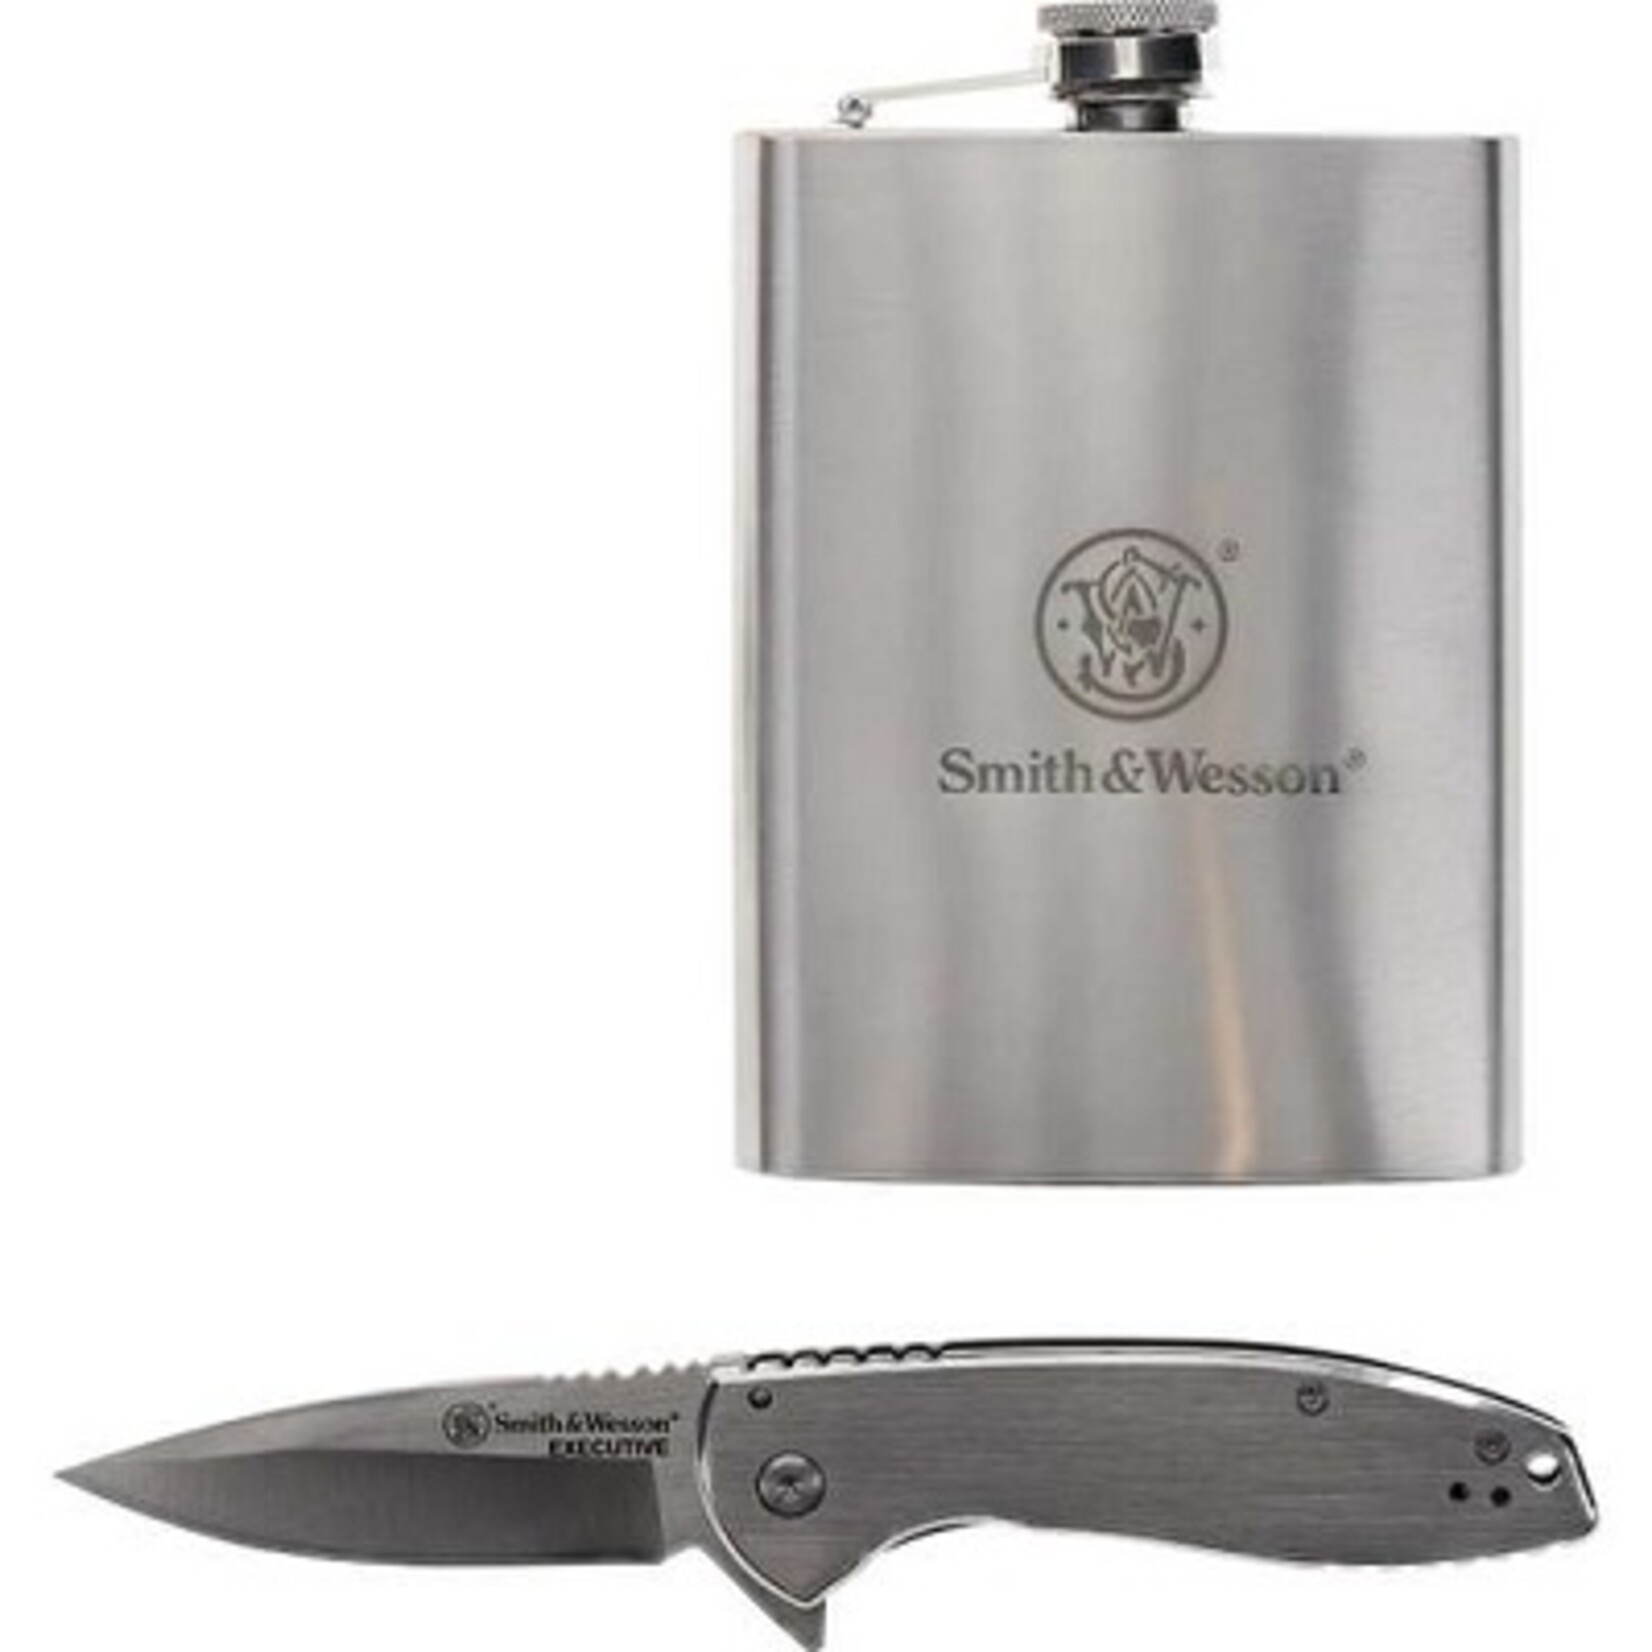 SMITH & WESSON SMITH & WESSON KNIFE WITH FLASK